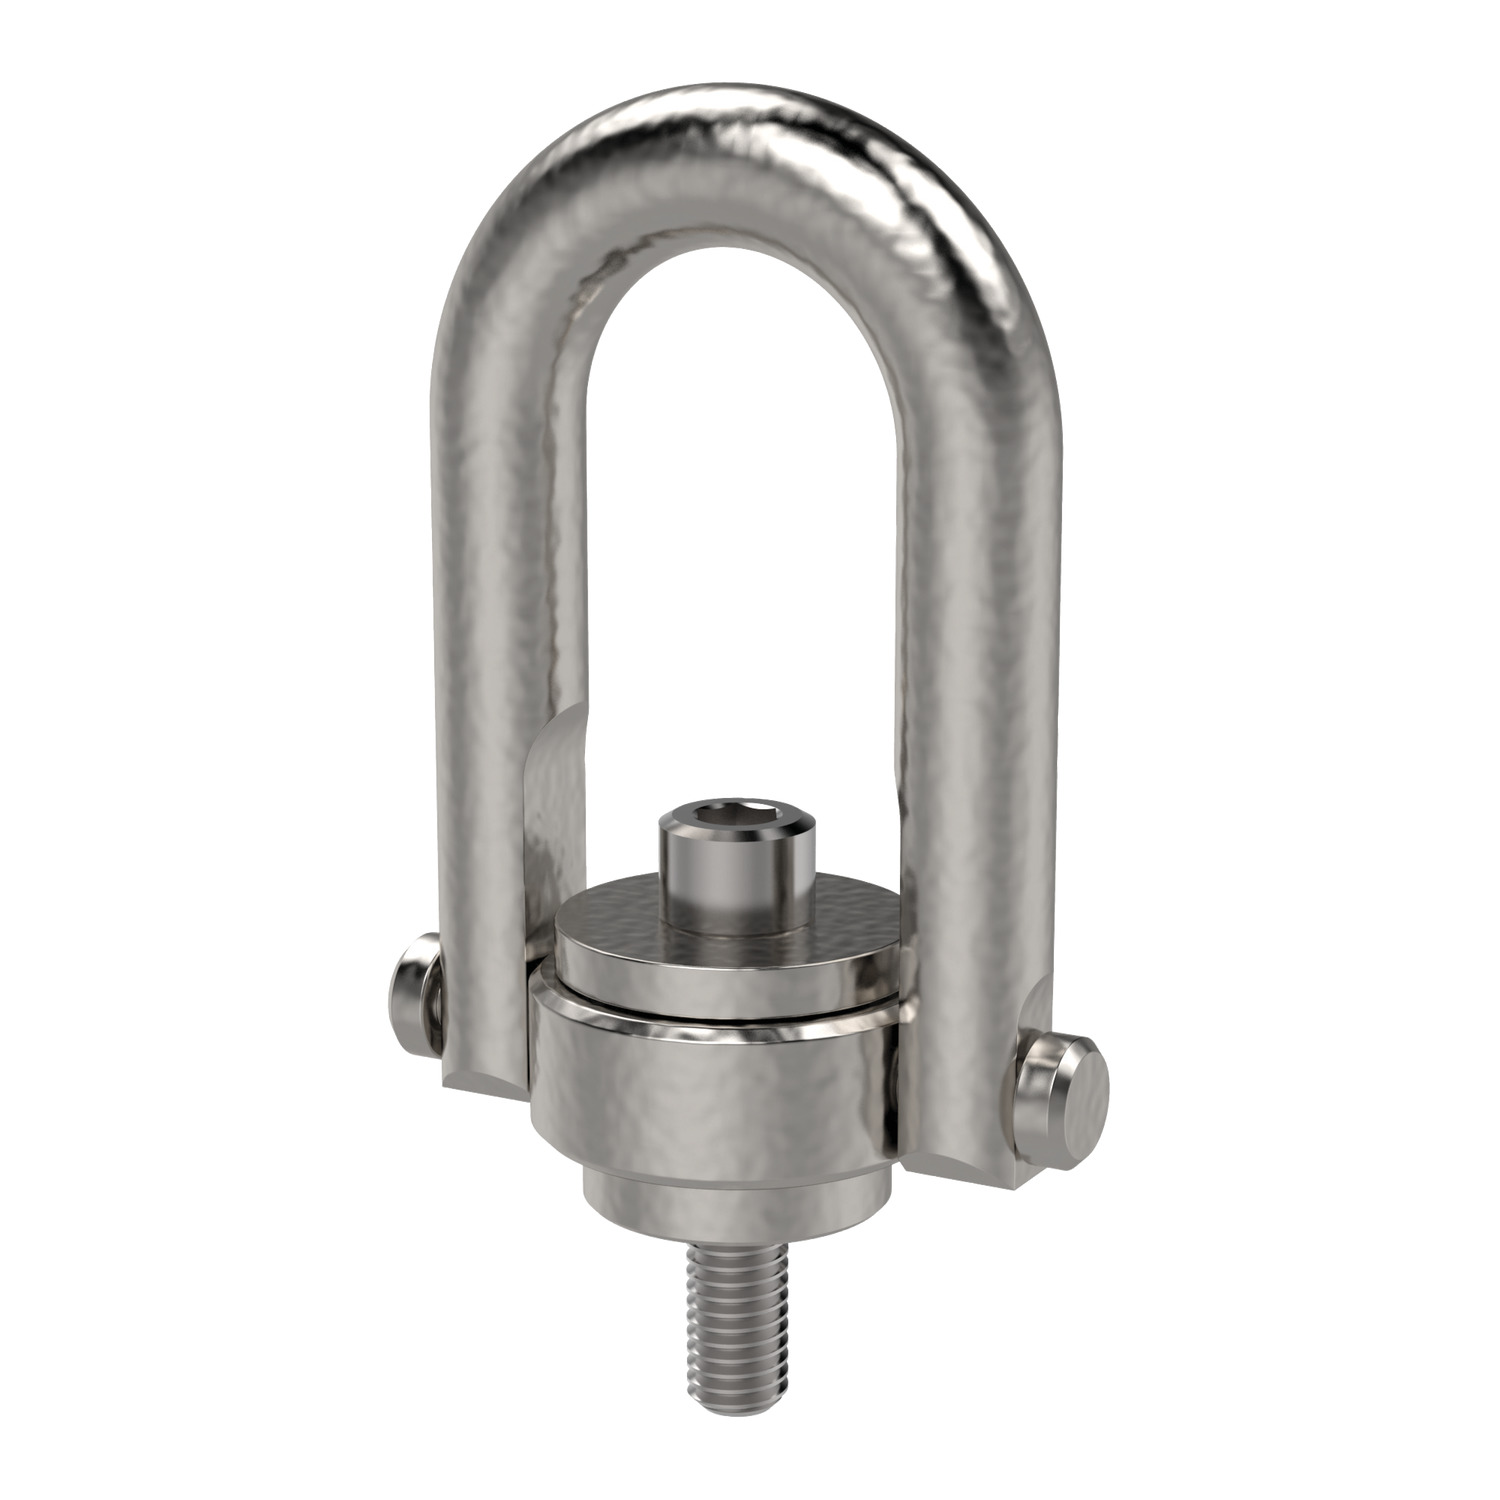 Product 63572, Lifting Points - Double Swivel - Male long bar - metric - coarse - stainless steel / 